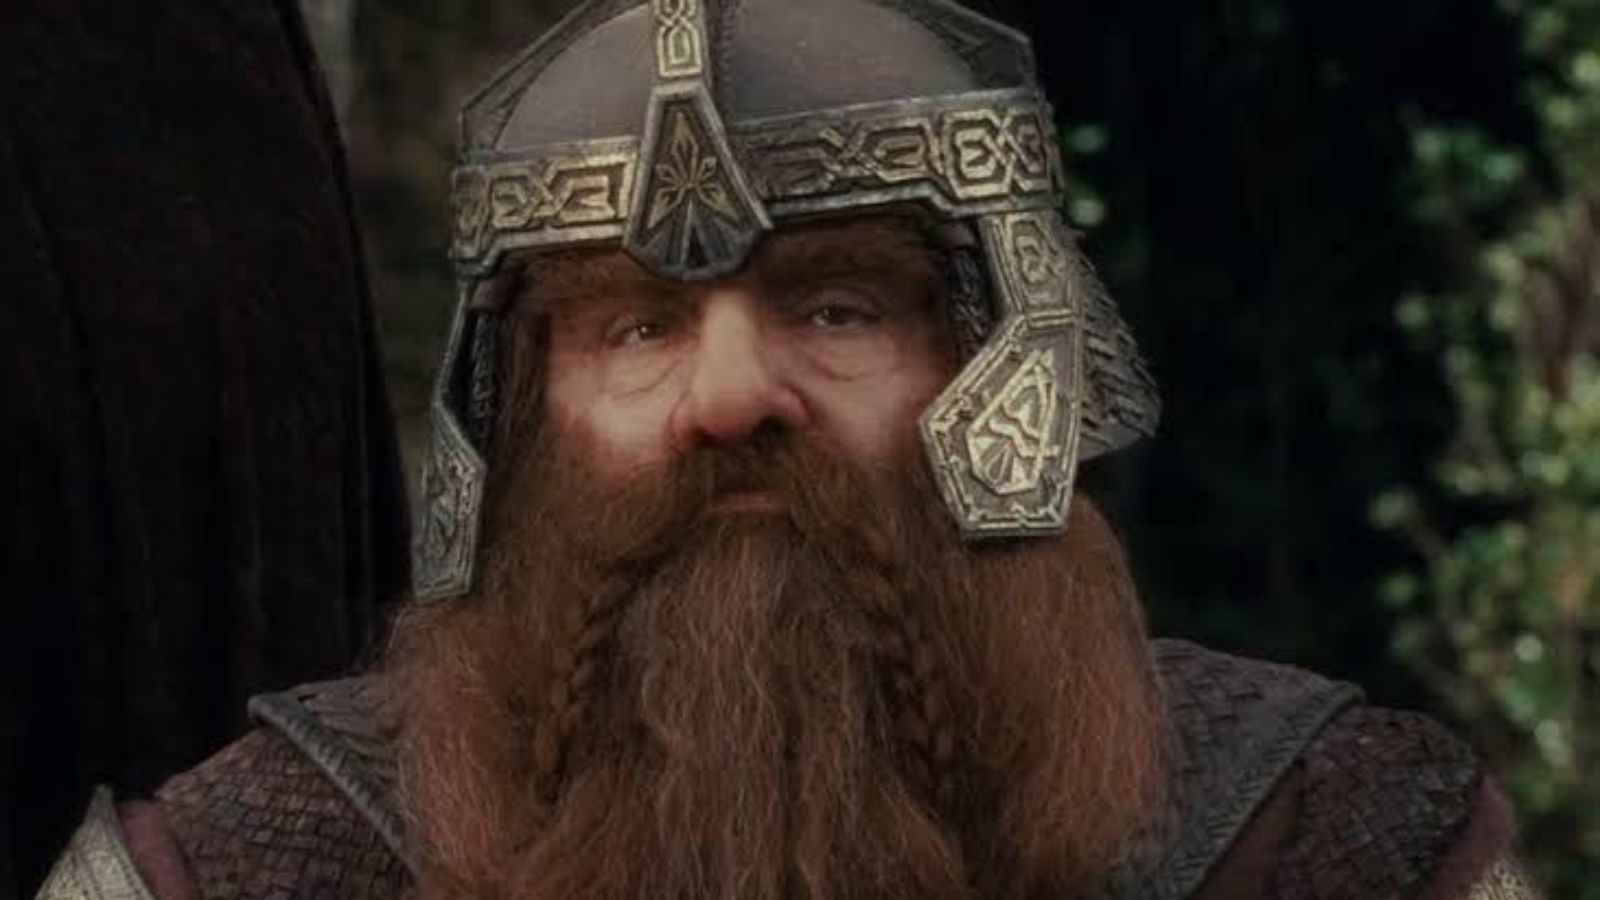 Why is Gimli the most powerful dwarf of the Middle Earth?